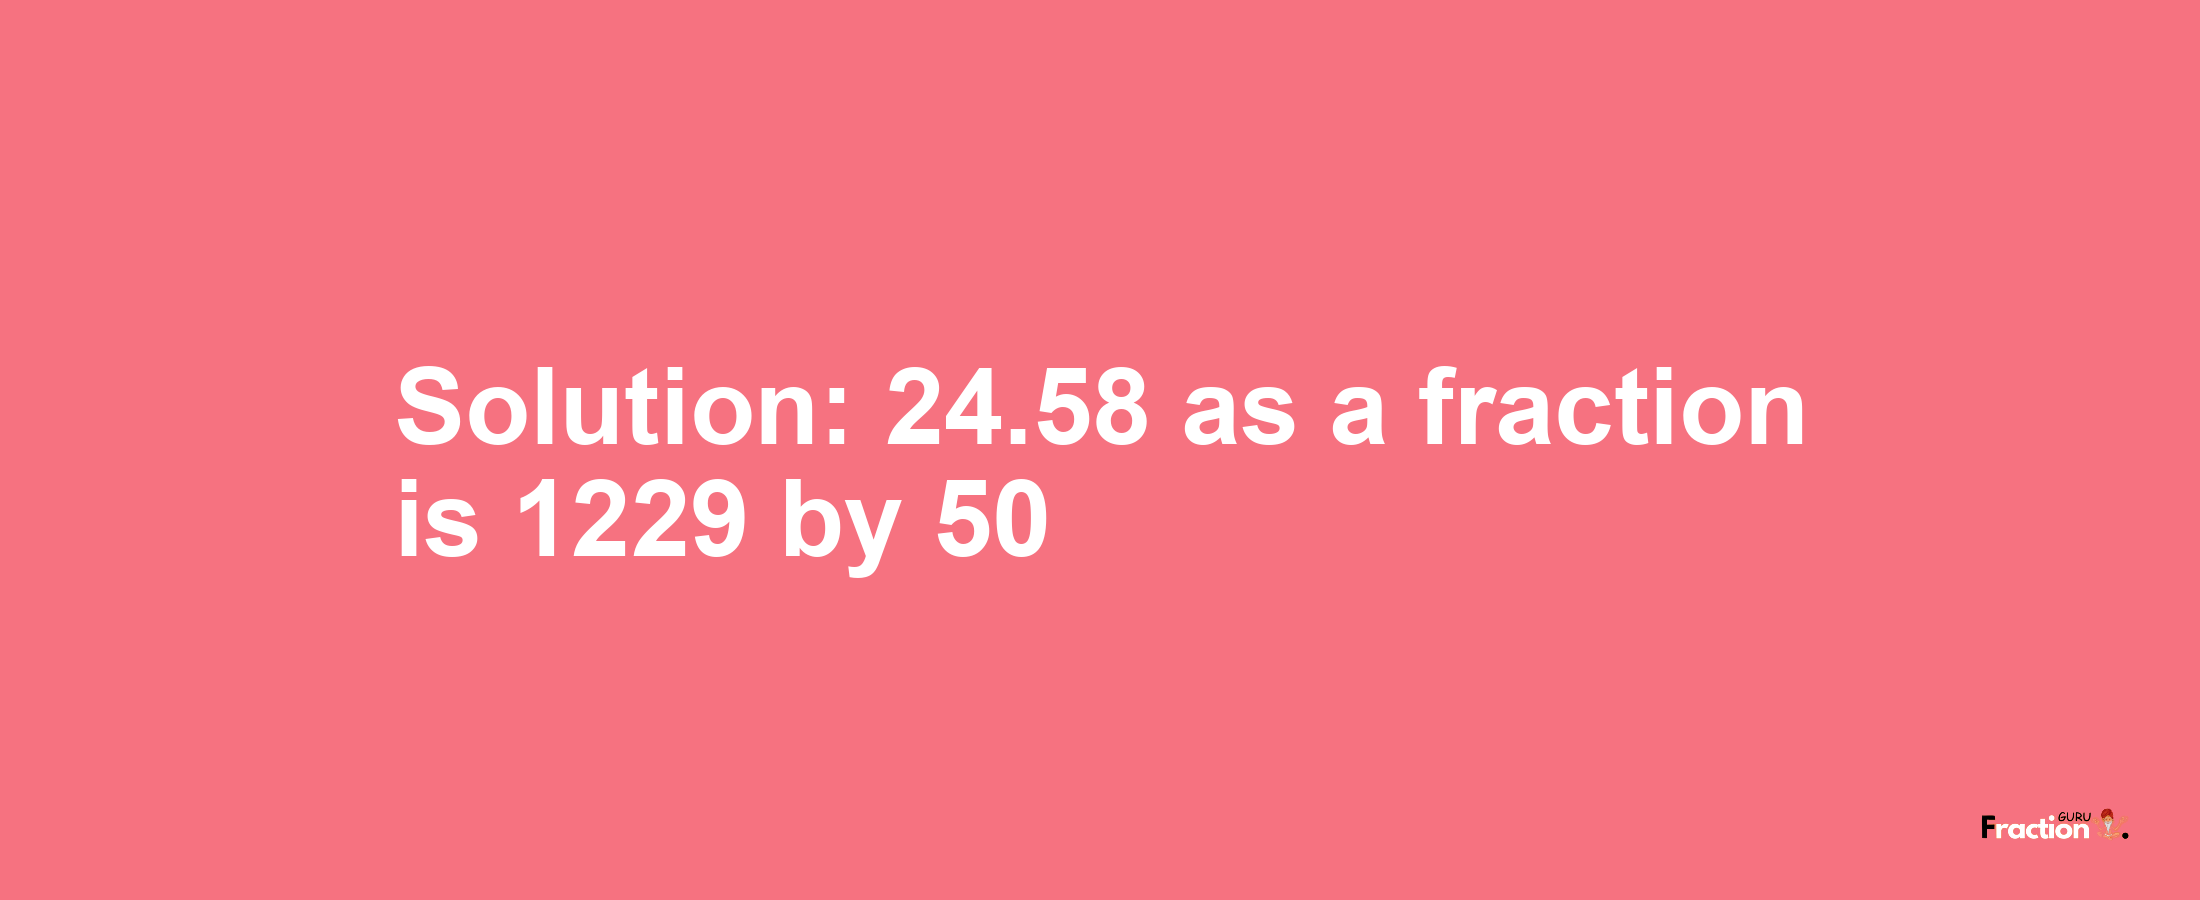 Solution:24.58 as a fraction is 1229/50